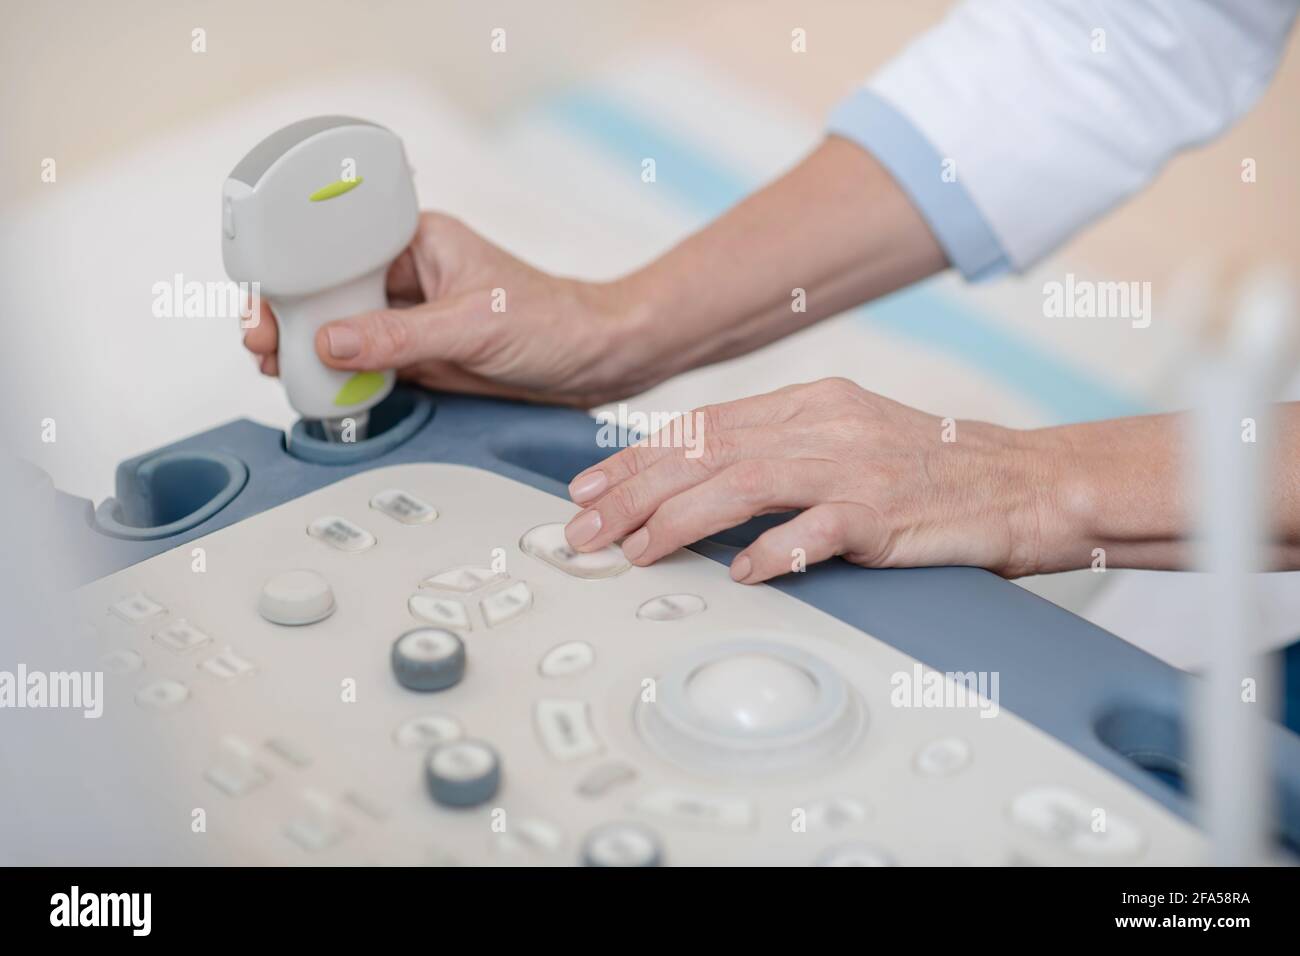 Hands of doctor near control panel and ultrasound sensor Stock Photo